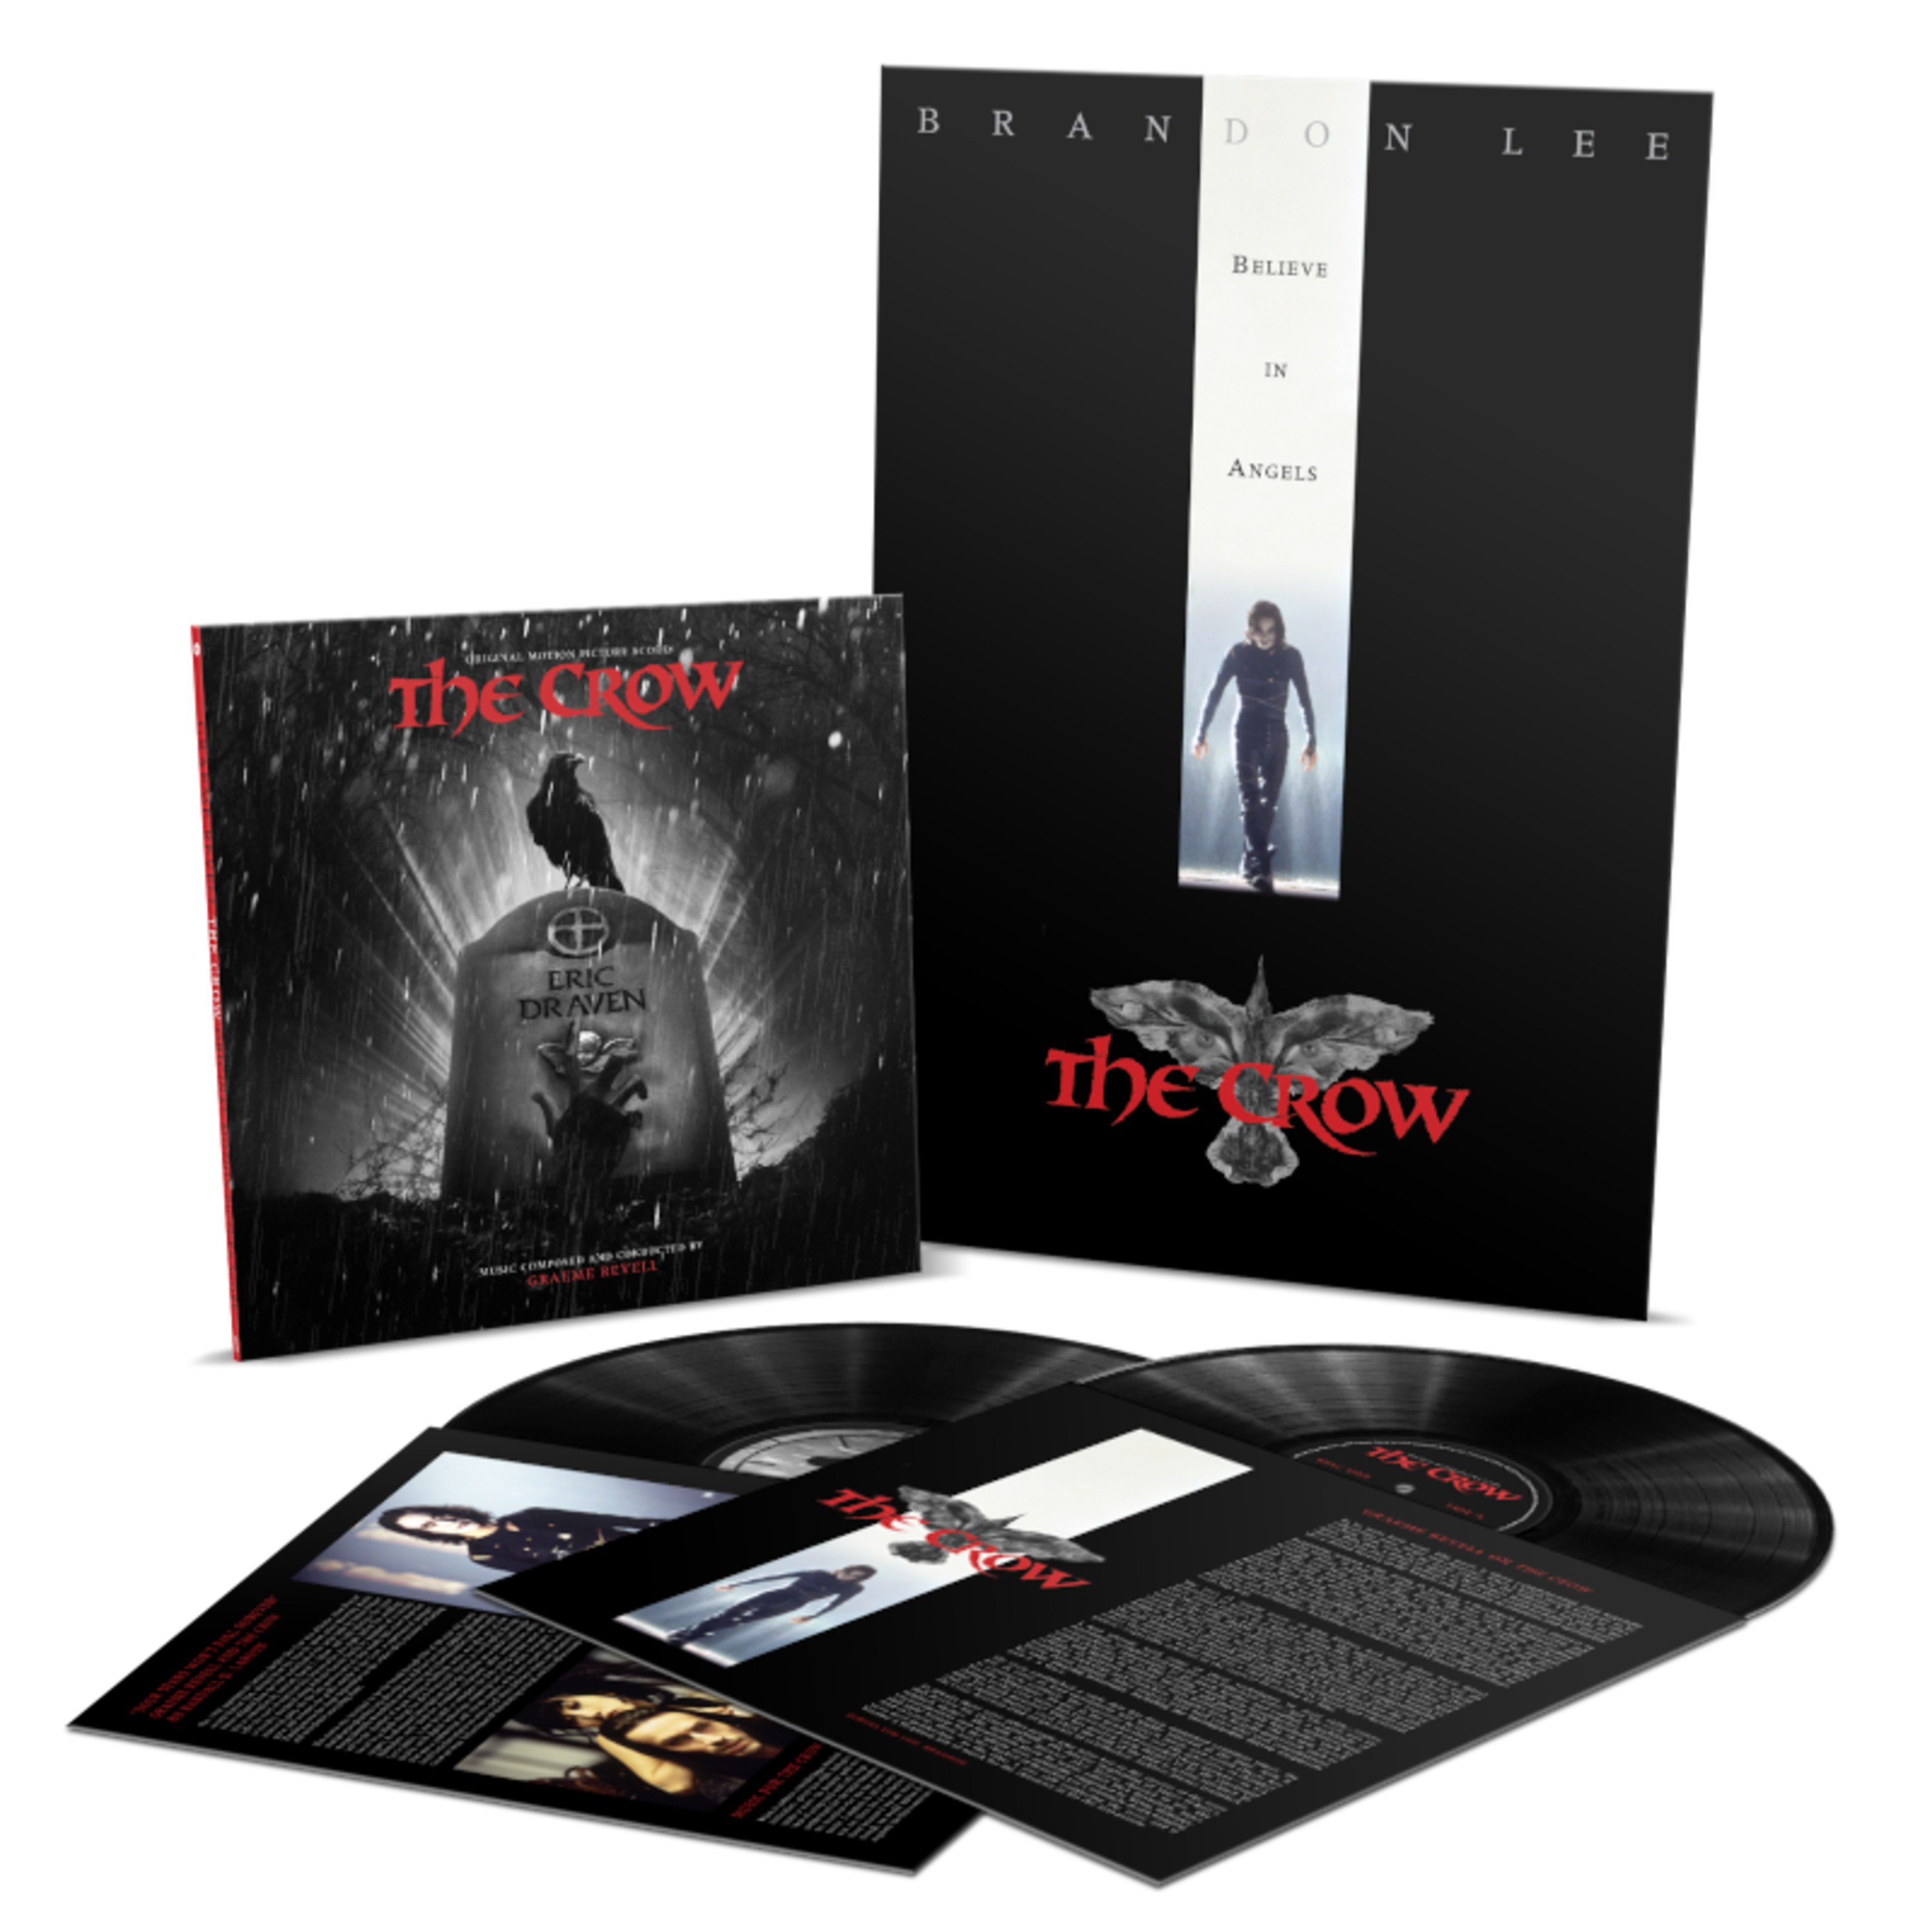 Graeme Revell - The Crow OST